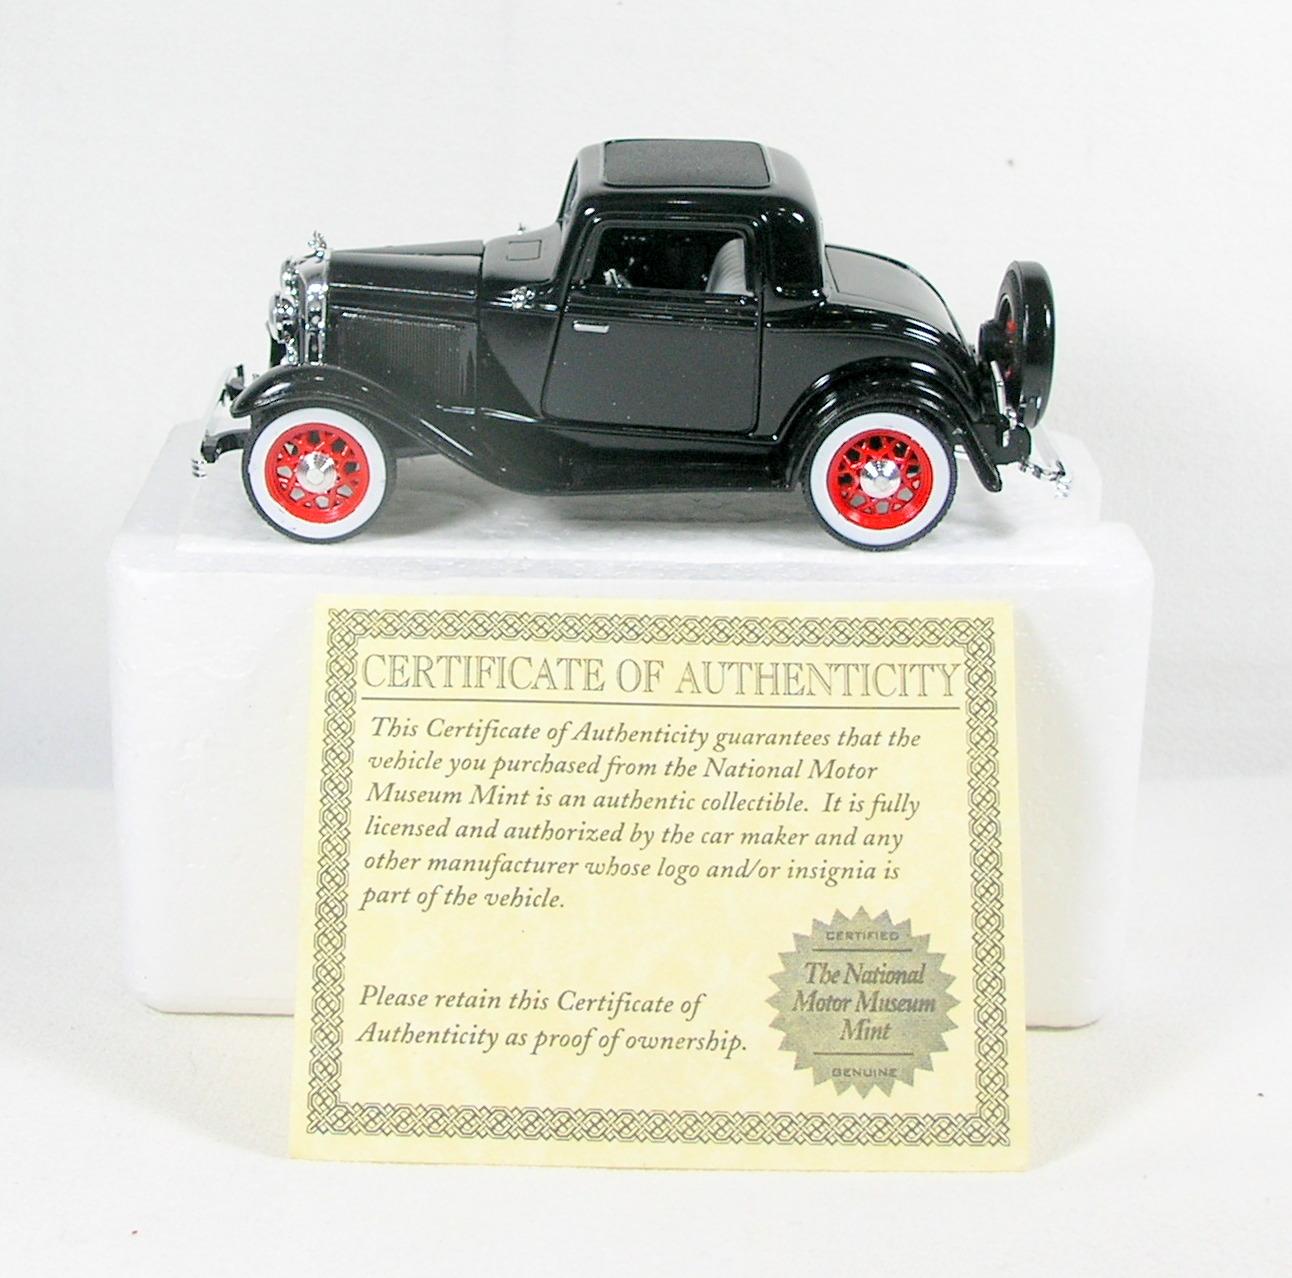 Diecast Replica of 1932 Ford 3-window Coupe From National Motor Museum Mint